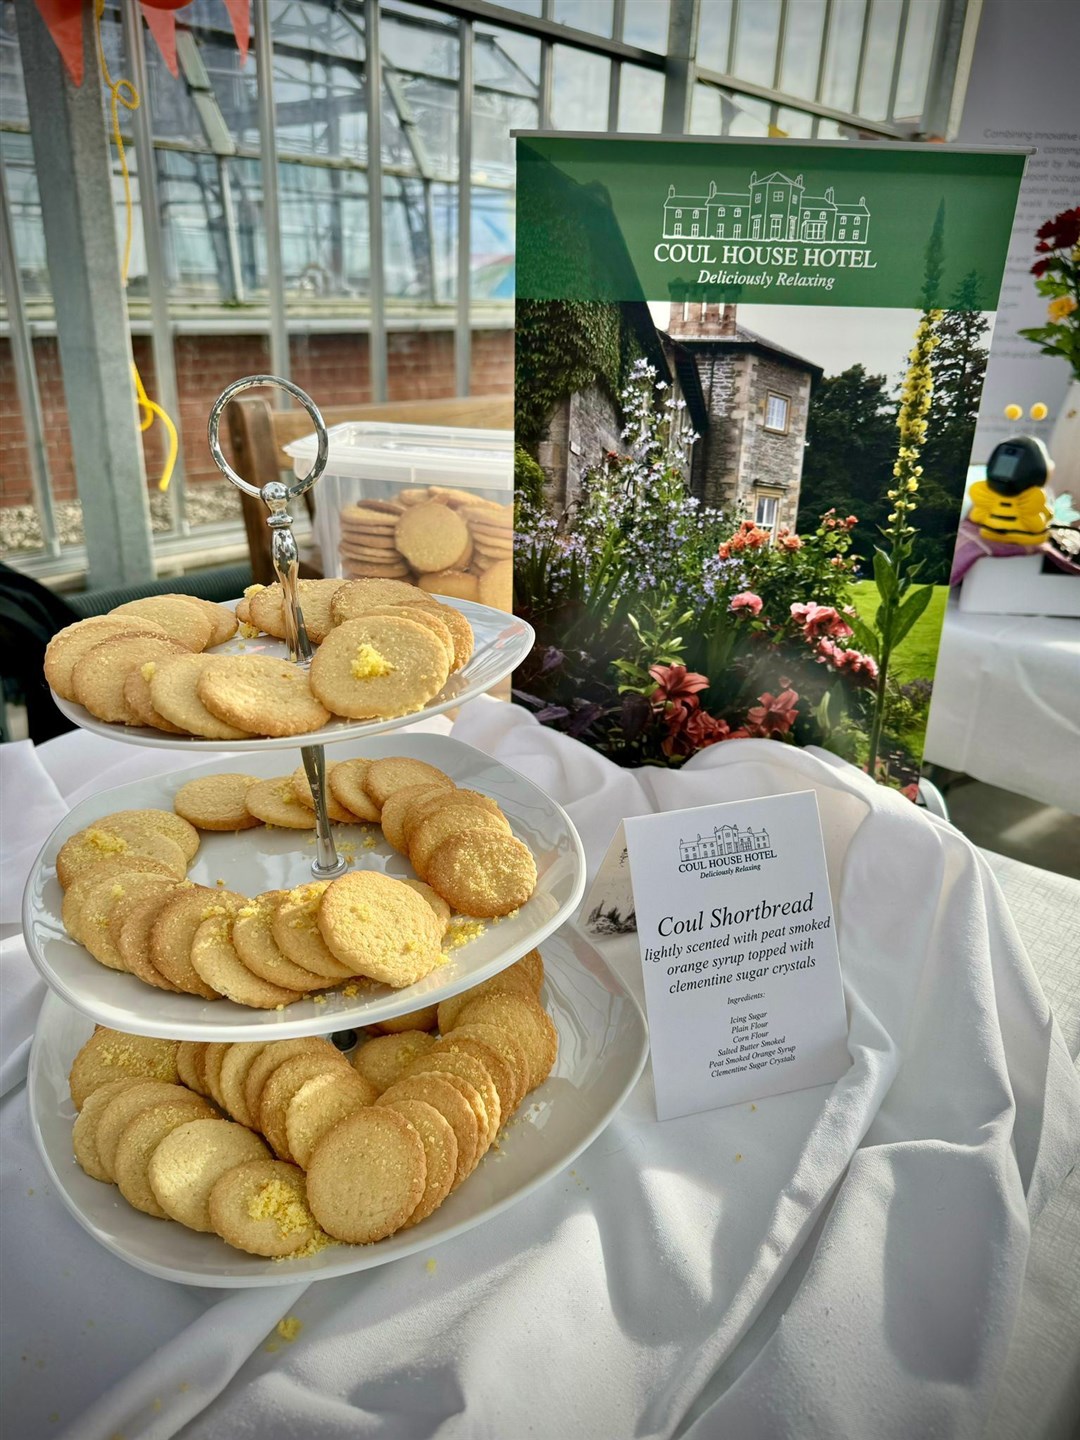 Coul House Hotel produced a shortbread lightly scented with peat for the heat. Photo: Visit Inverness Loch Ness